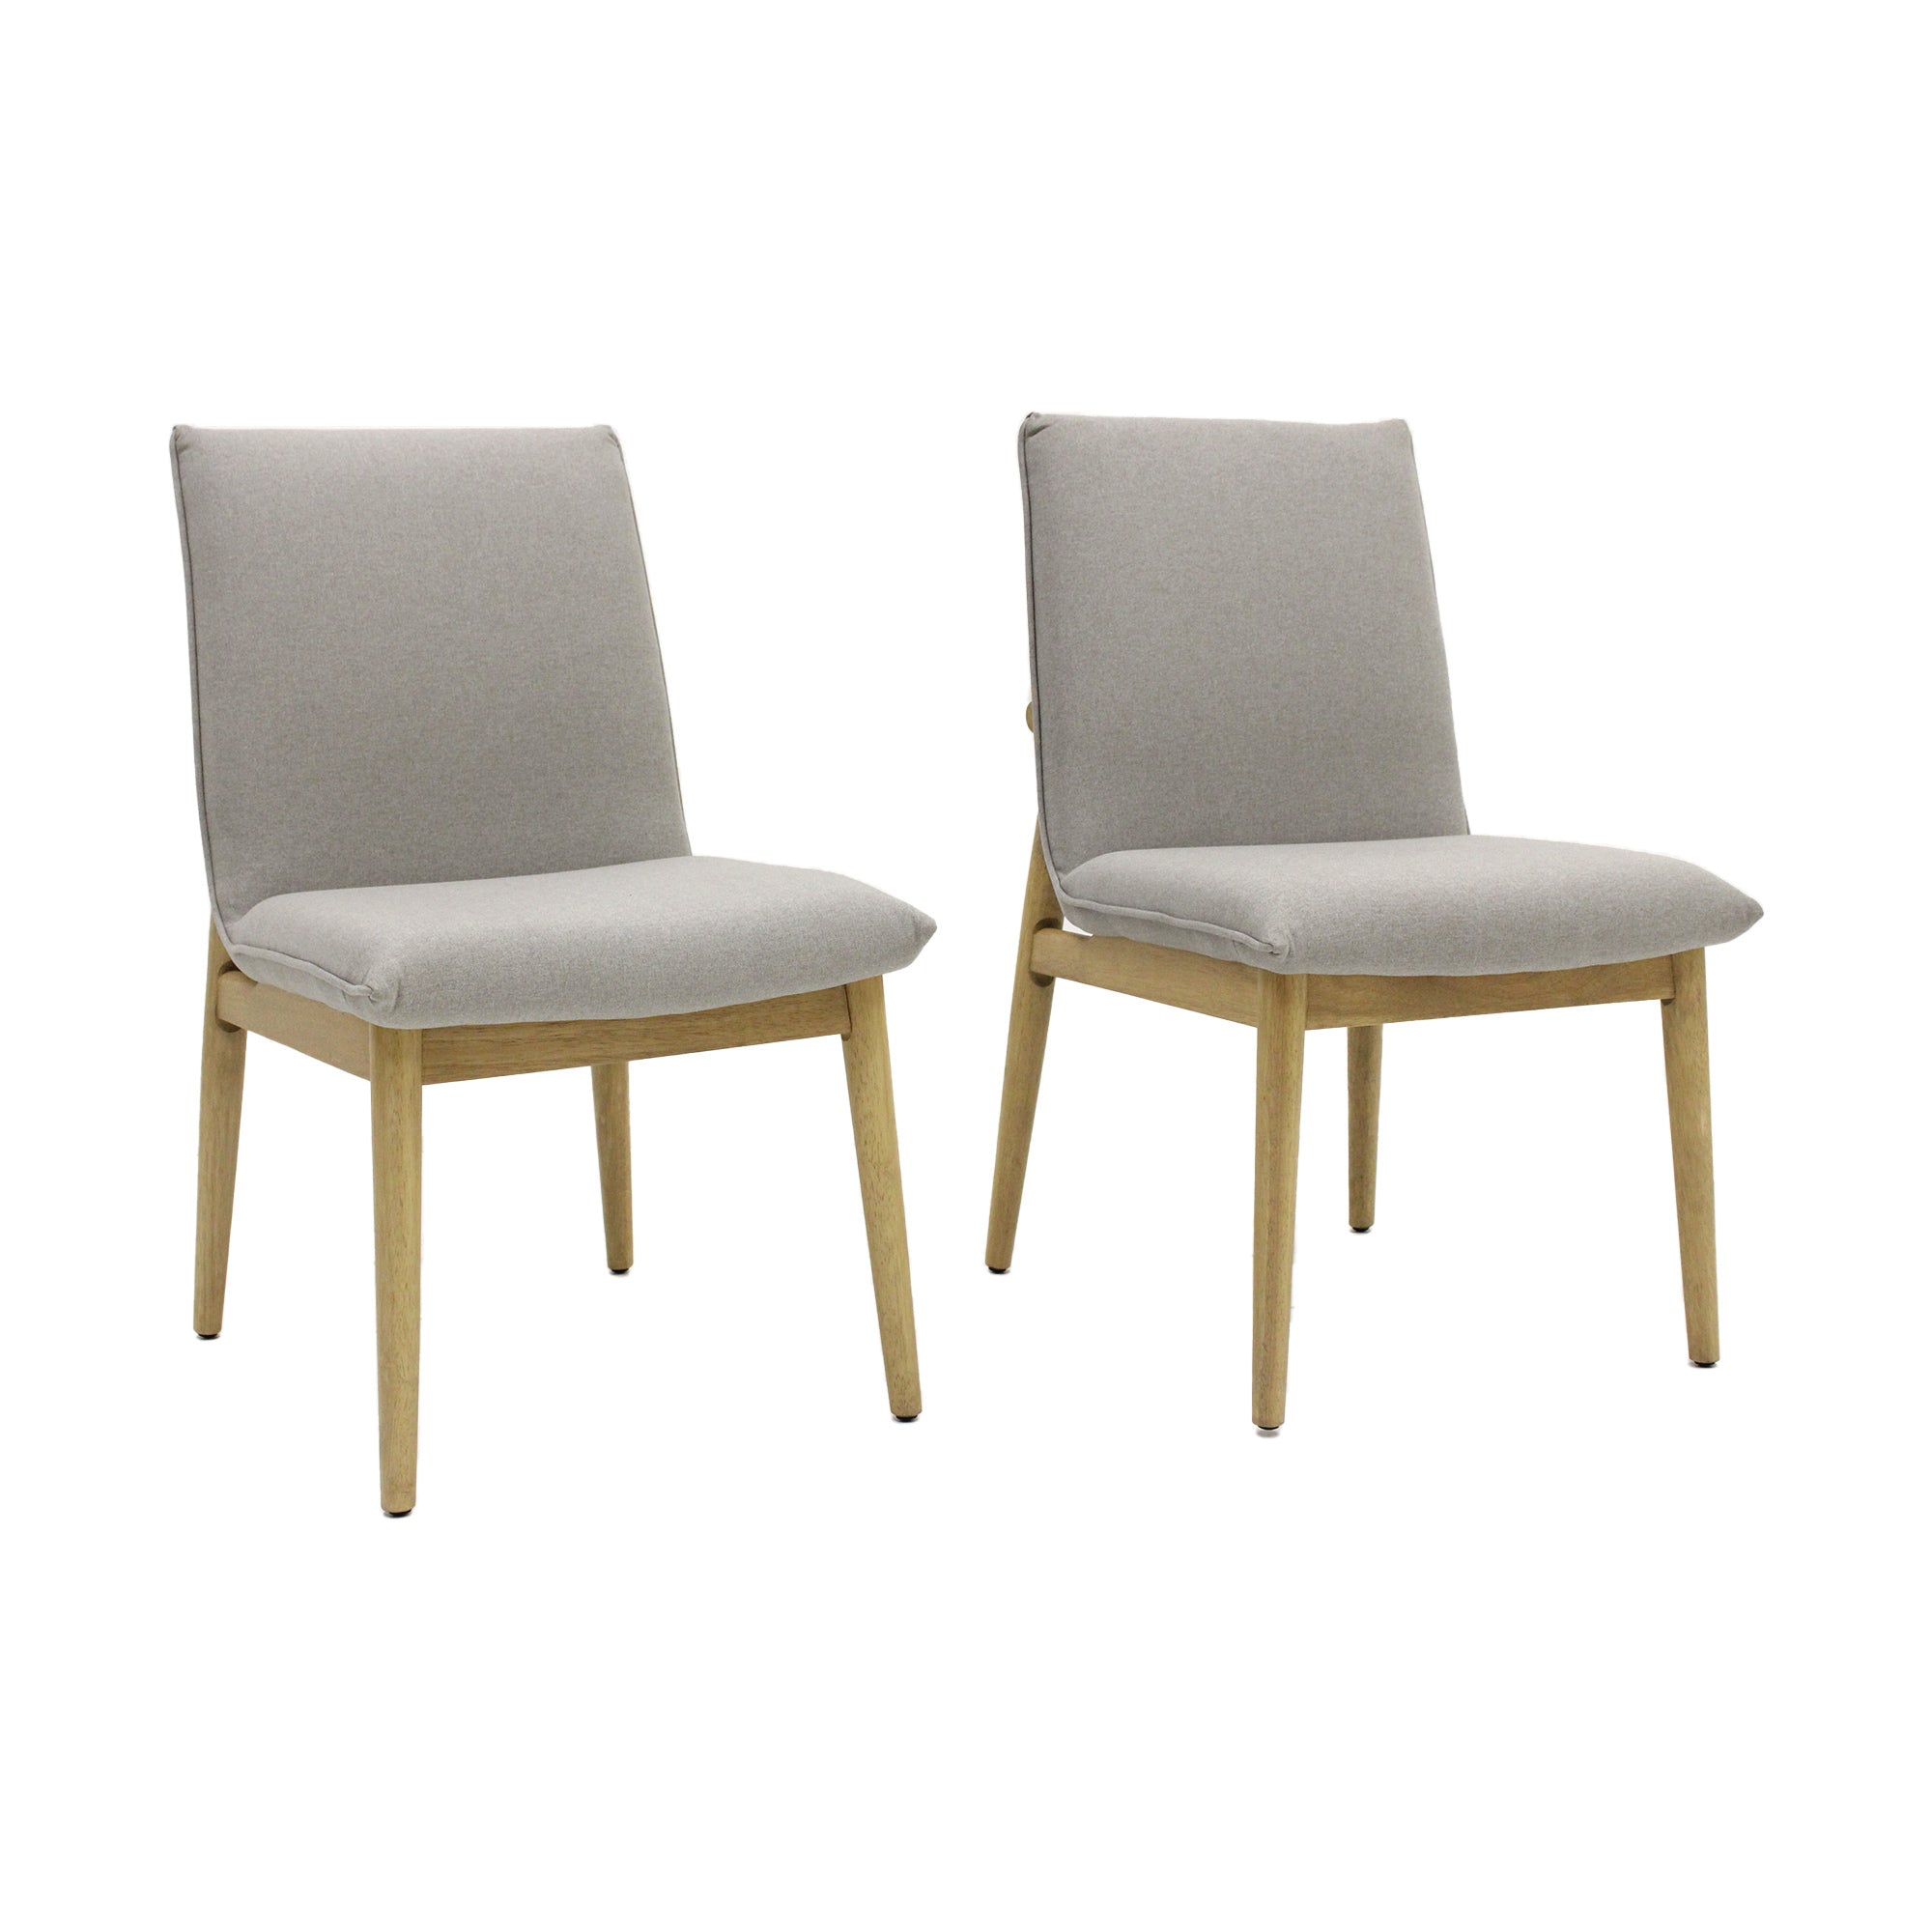 Nova Upholstered Wood Dining Chairs Set of 2